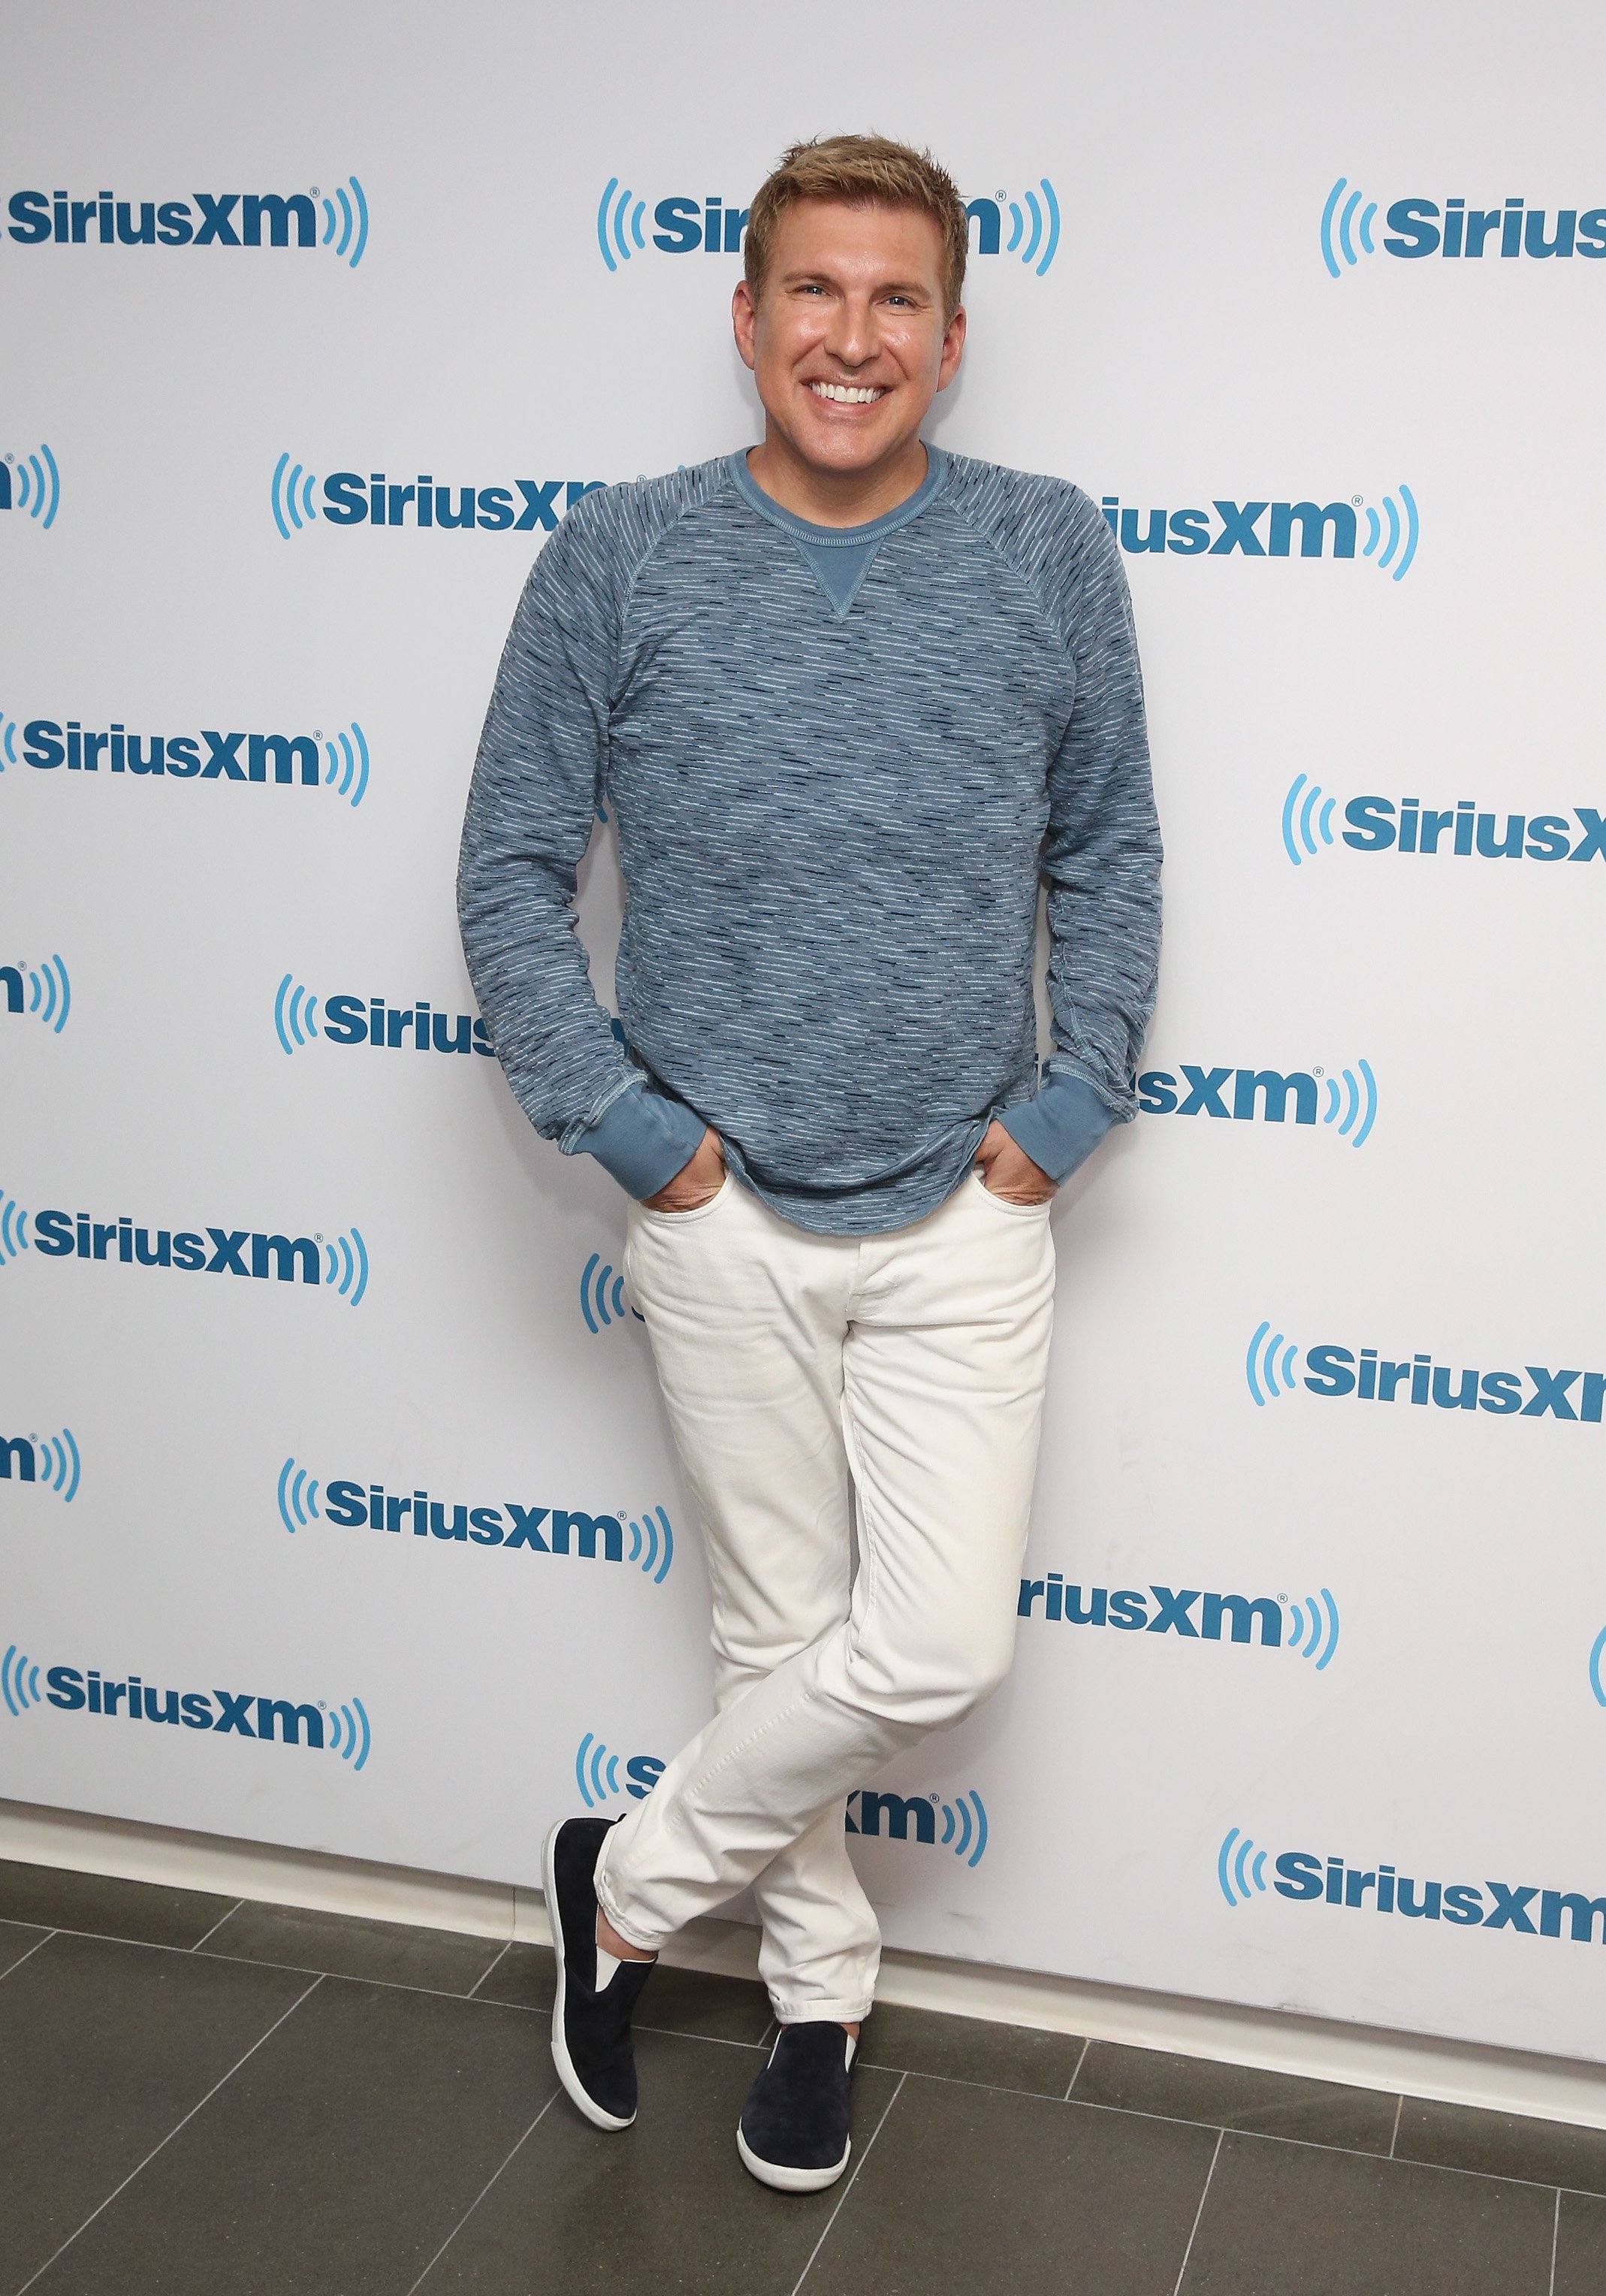 Reality star Todd Chrisley's 2015 visit to the SiriusXm Studios in New York City. | Photo: Getty Images